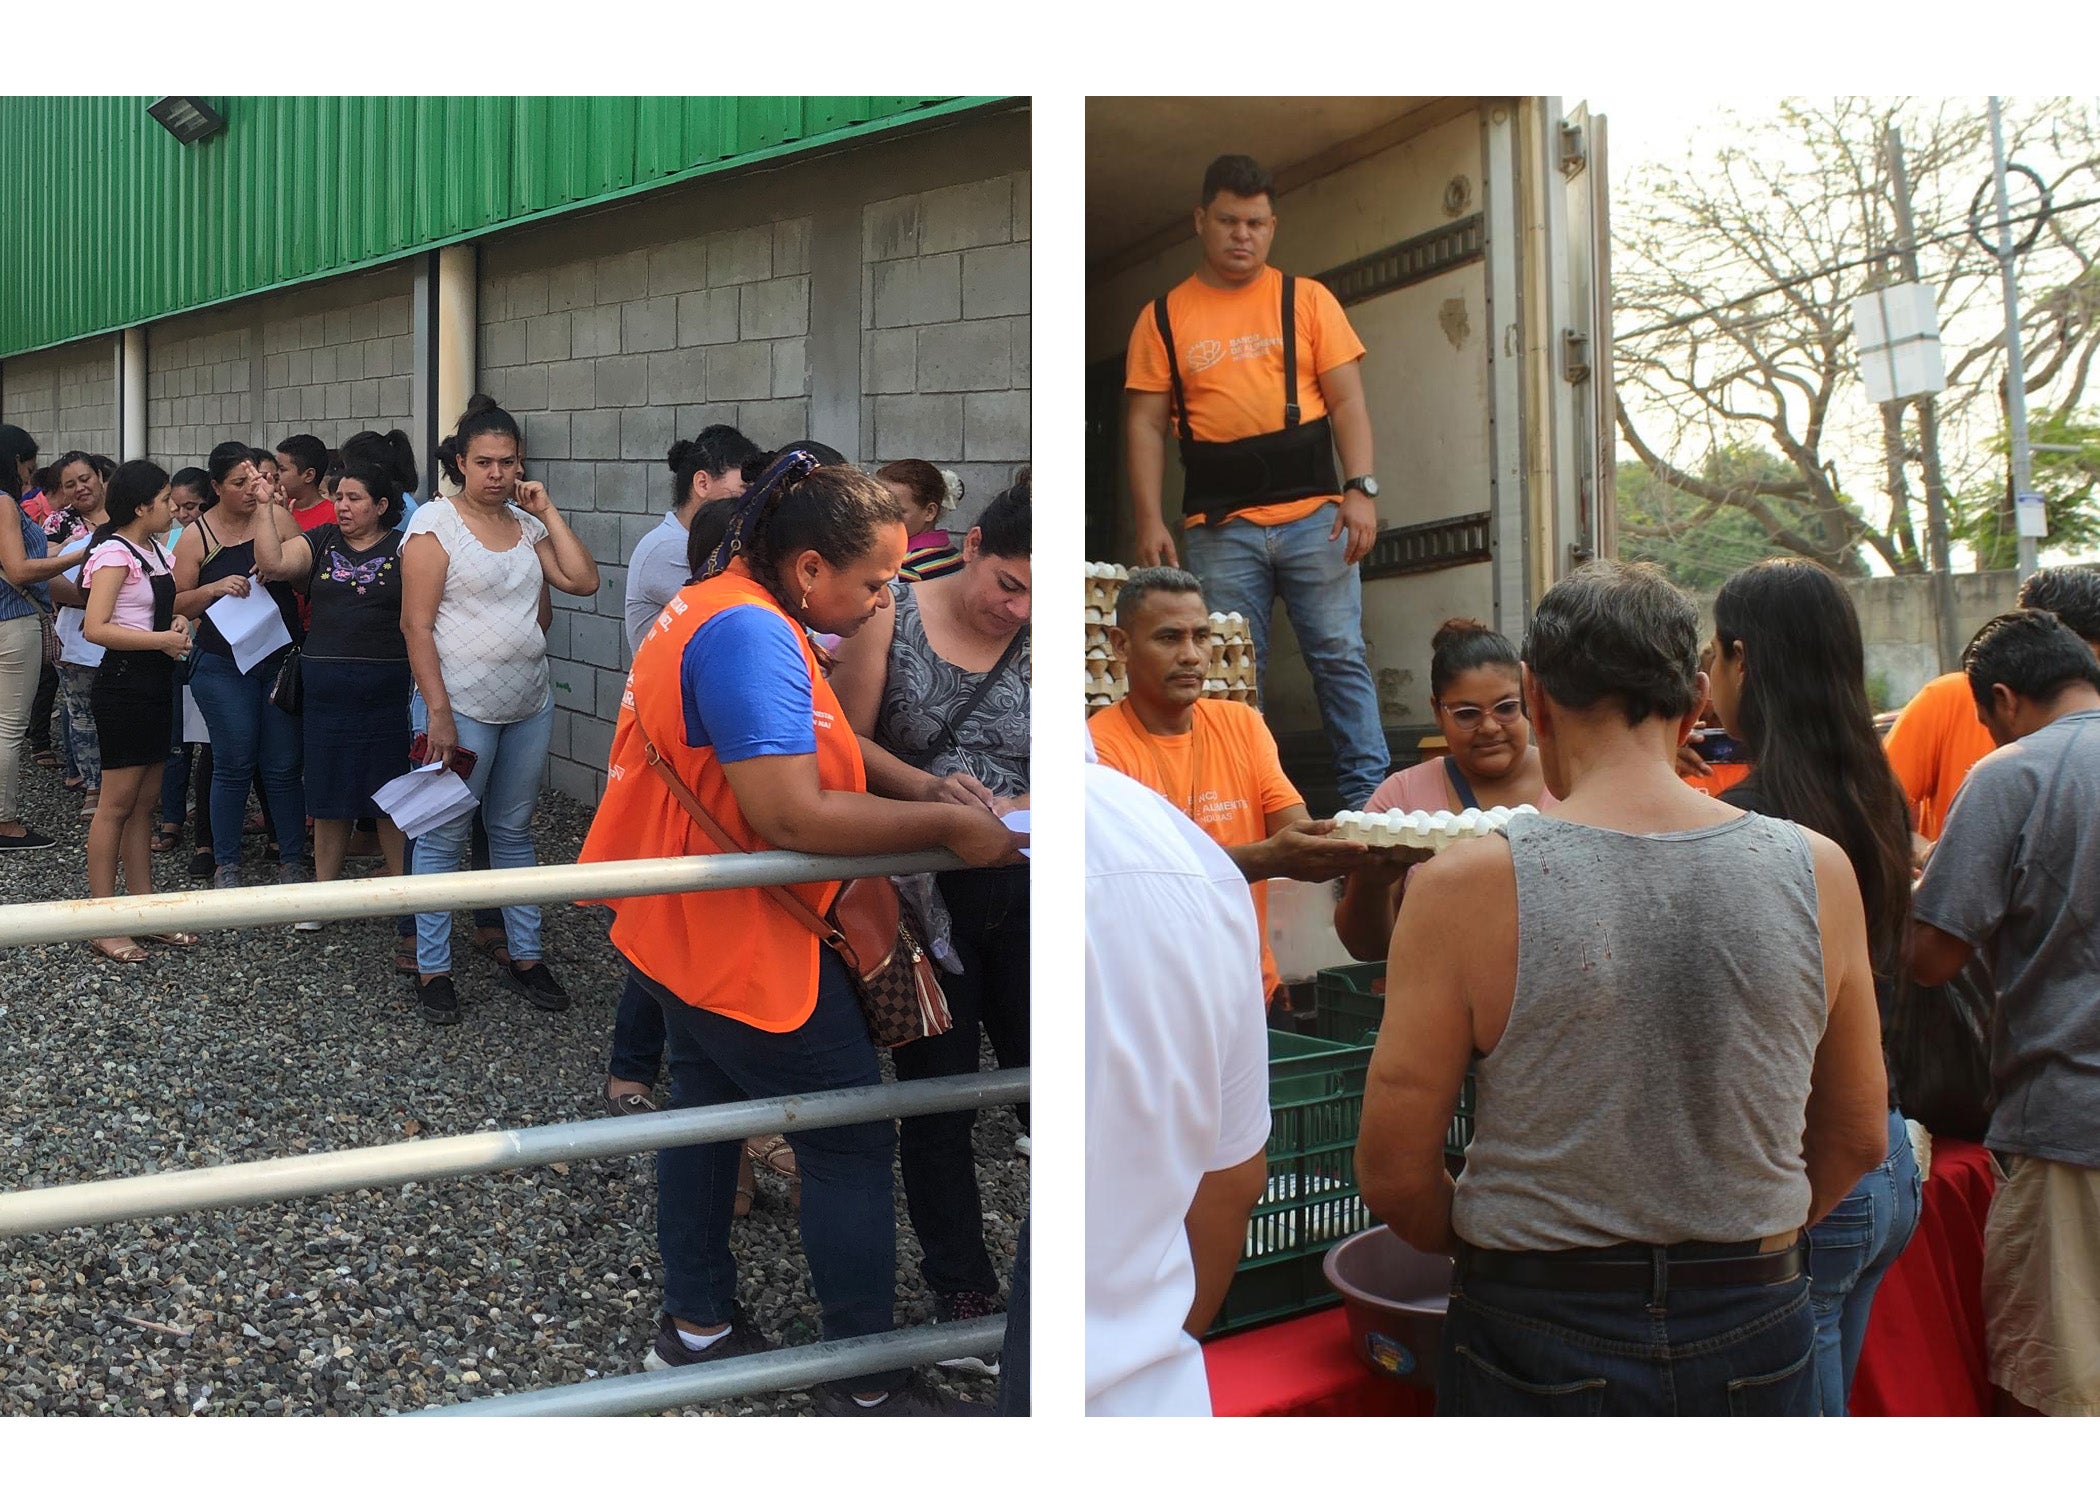 Two photos side by side. The first photo a group of people wait in line for food distribution. The second photo food is being distributed from the back of a truck. 